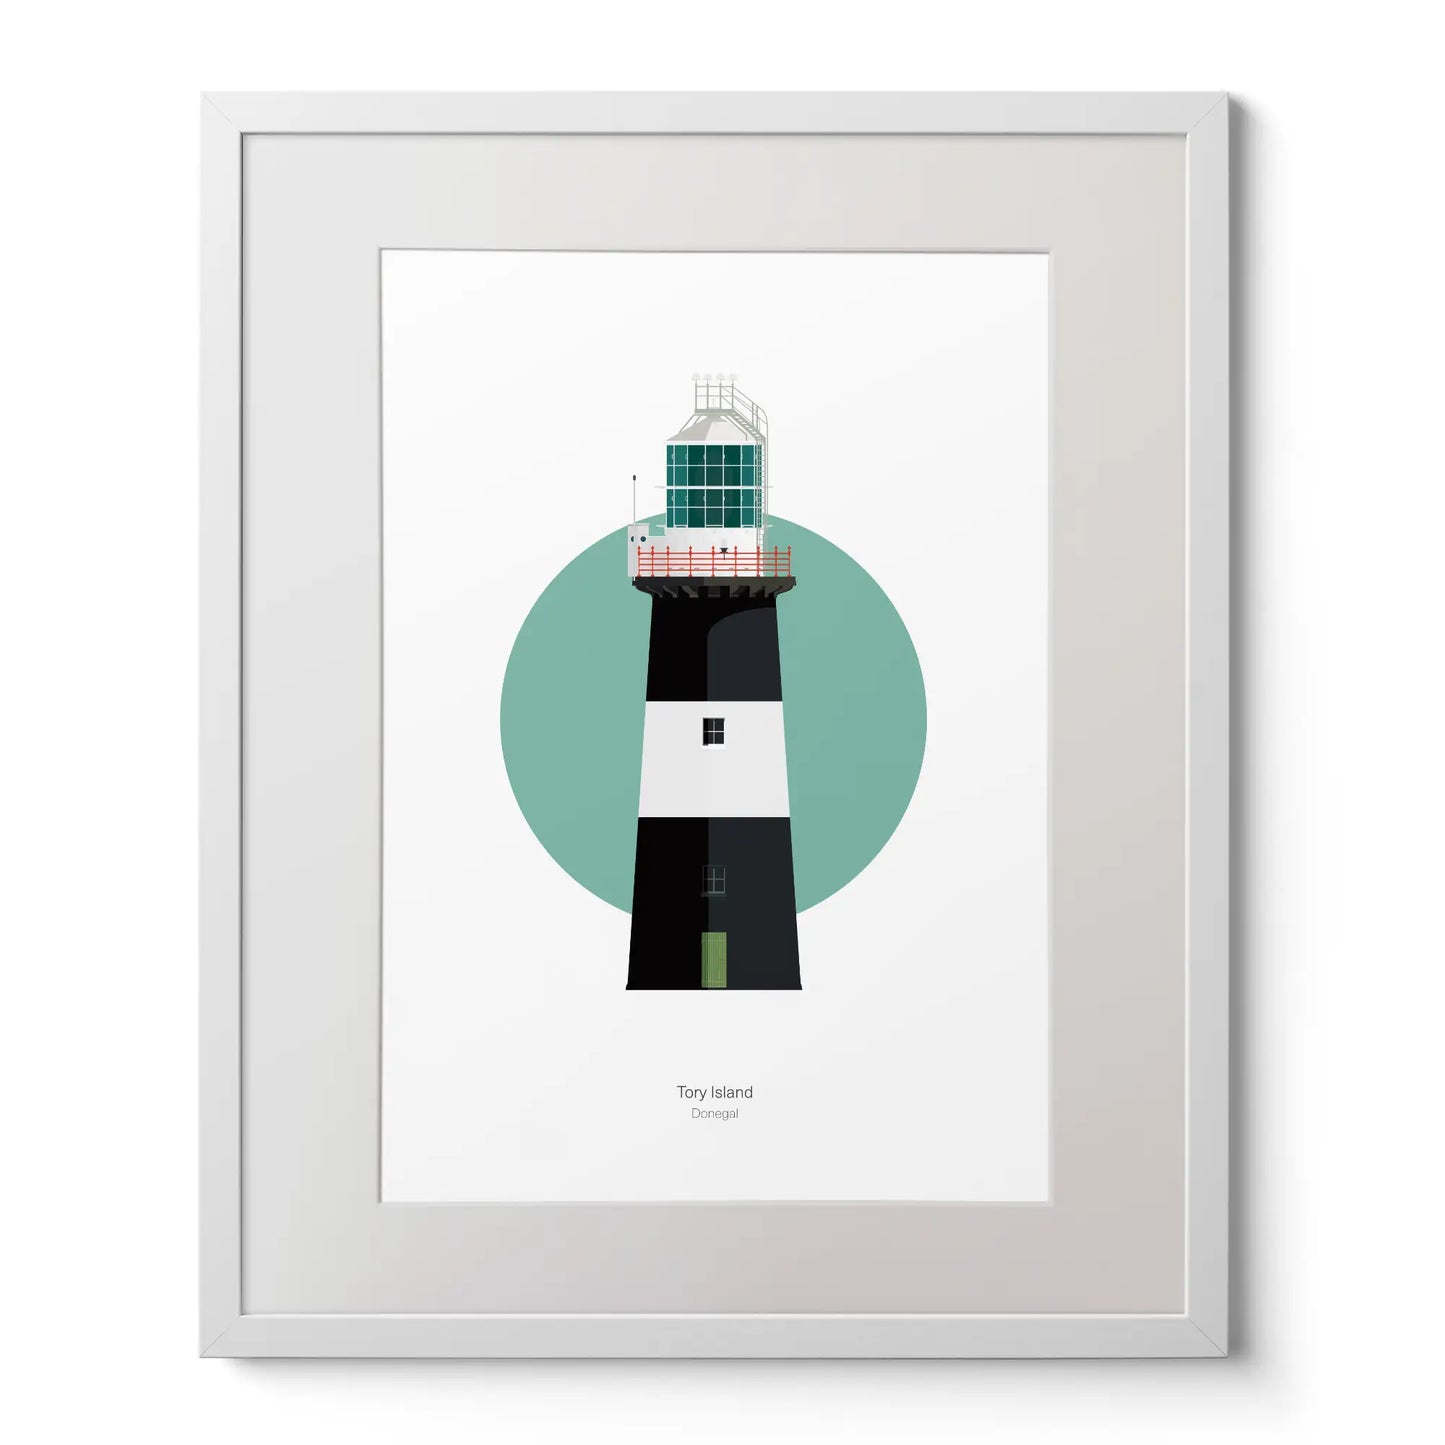 Illustration of Tory Island lighthouse on a white background inside light blue square, mounted and measuring 40x50cm.